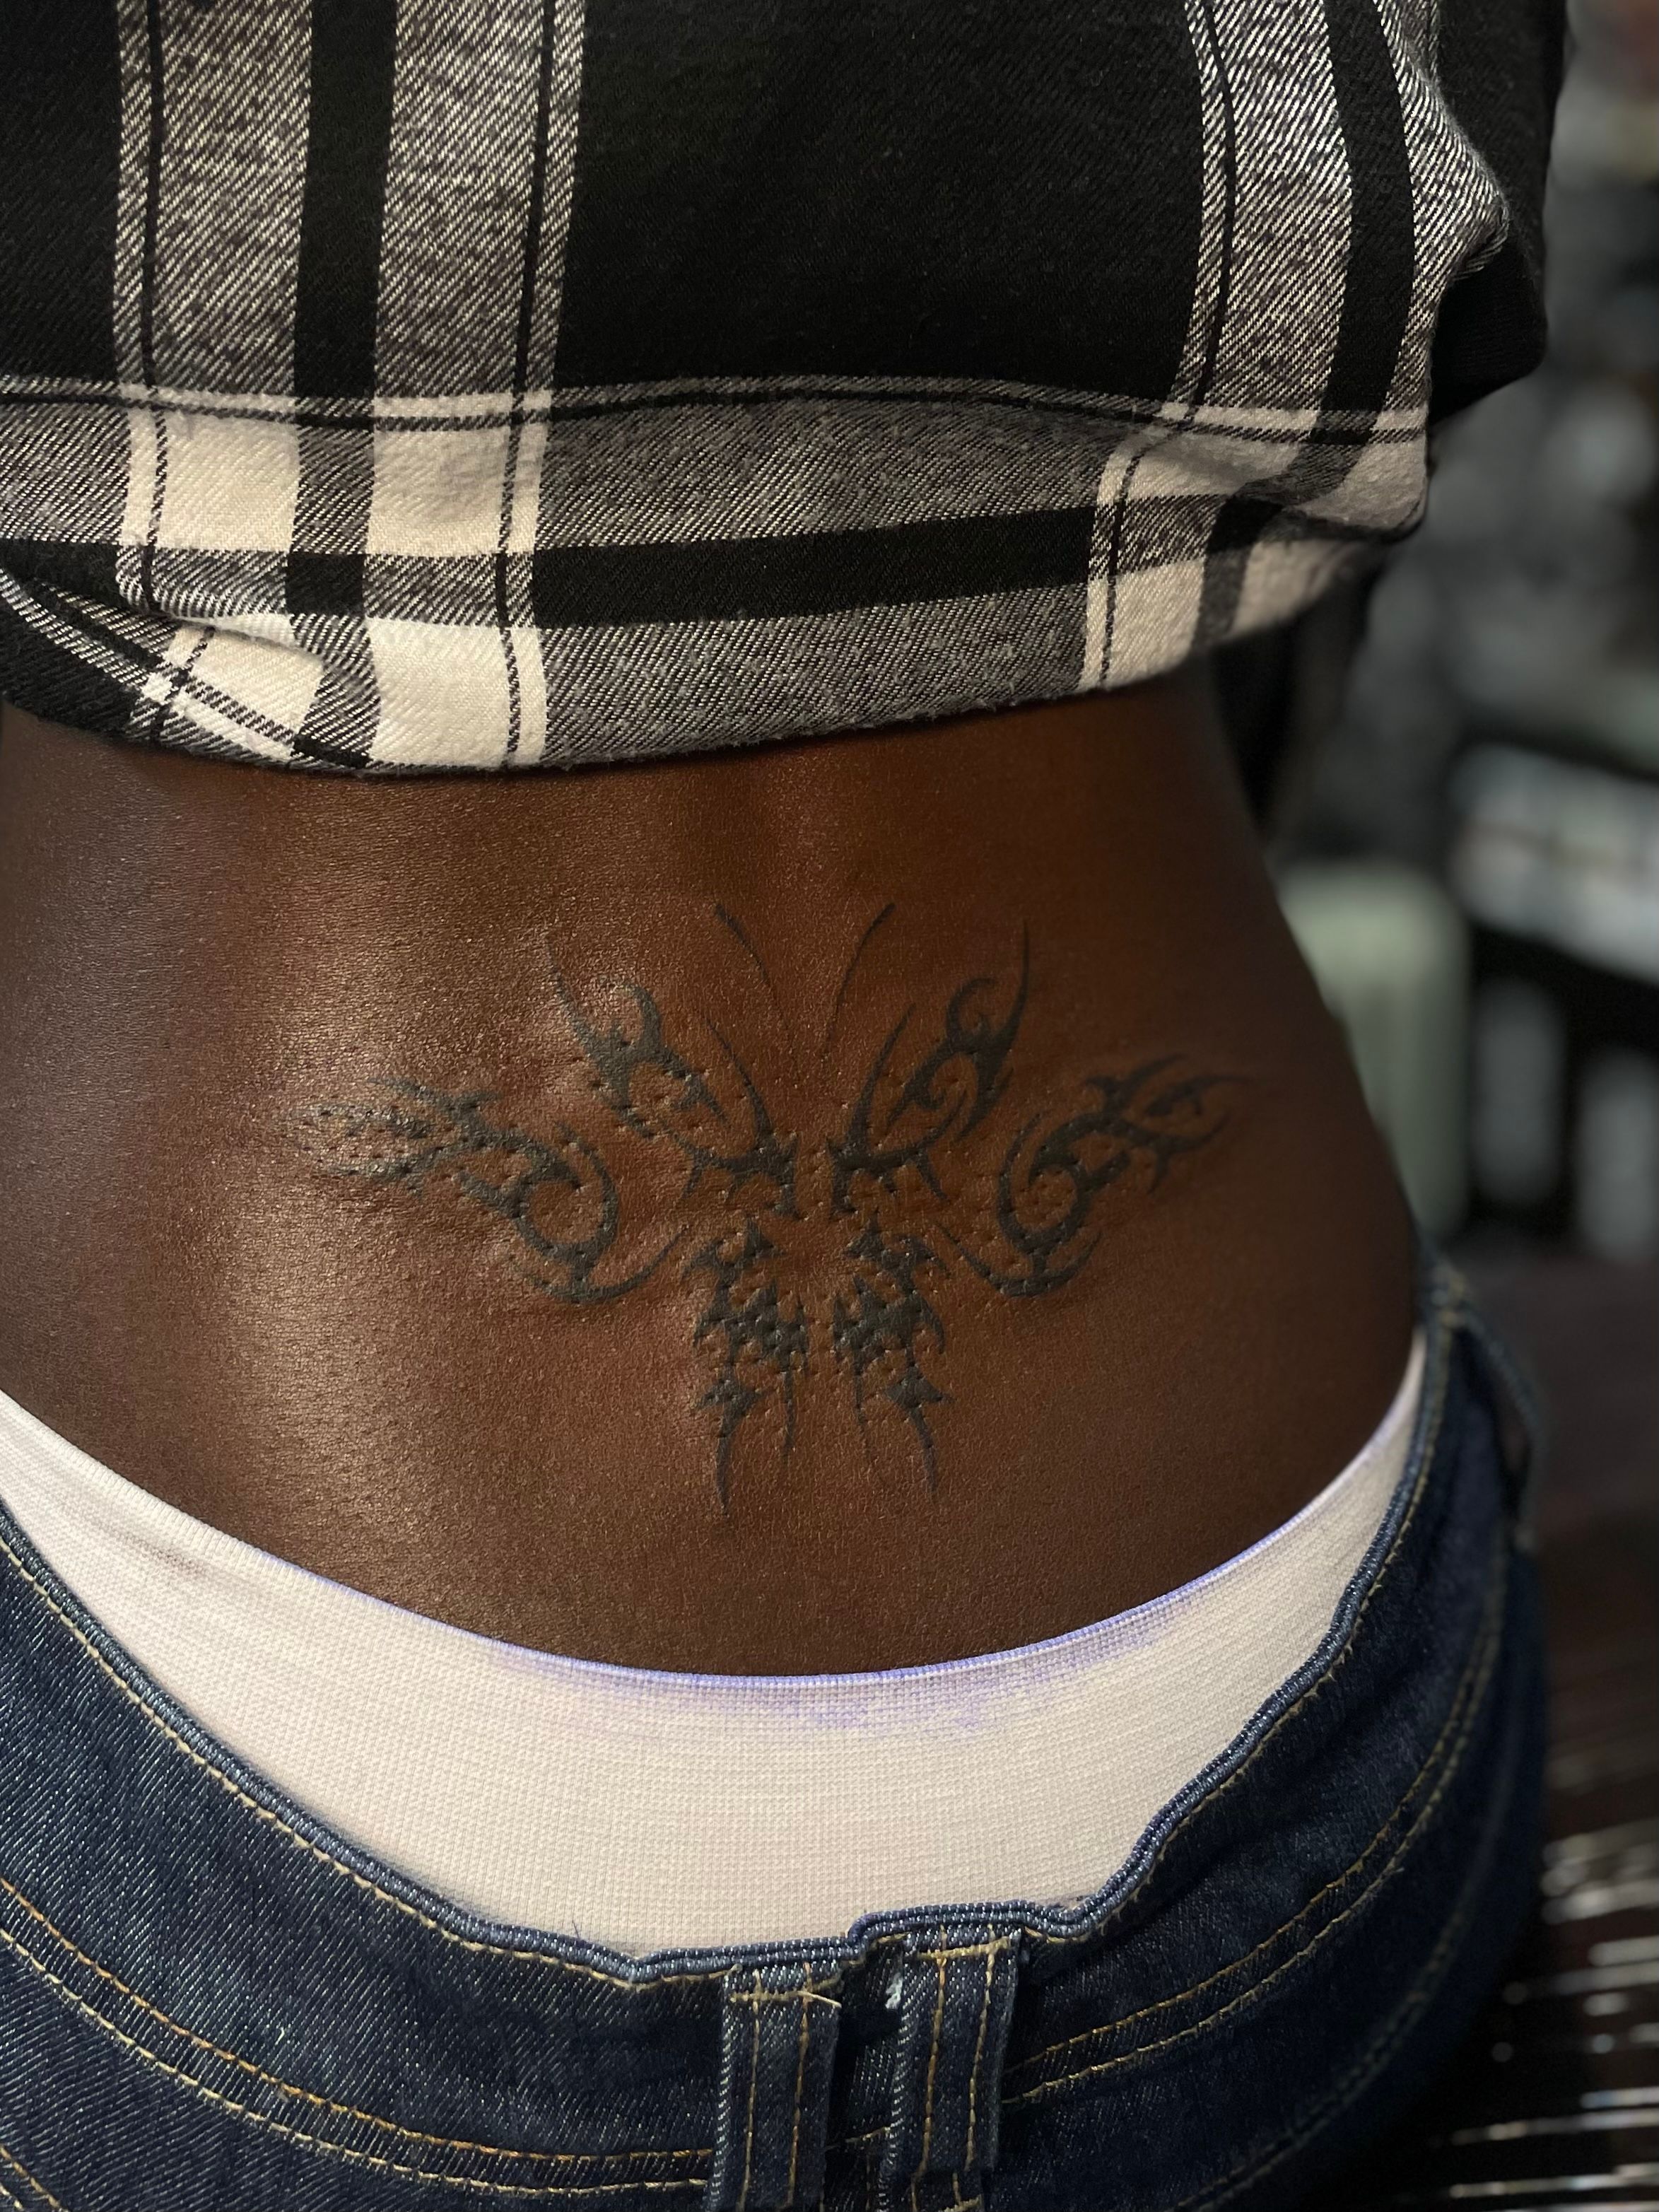 Tattoo Plan - Tramp Stamp (more in the comments) : r/TattooDesigns